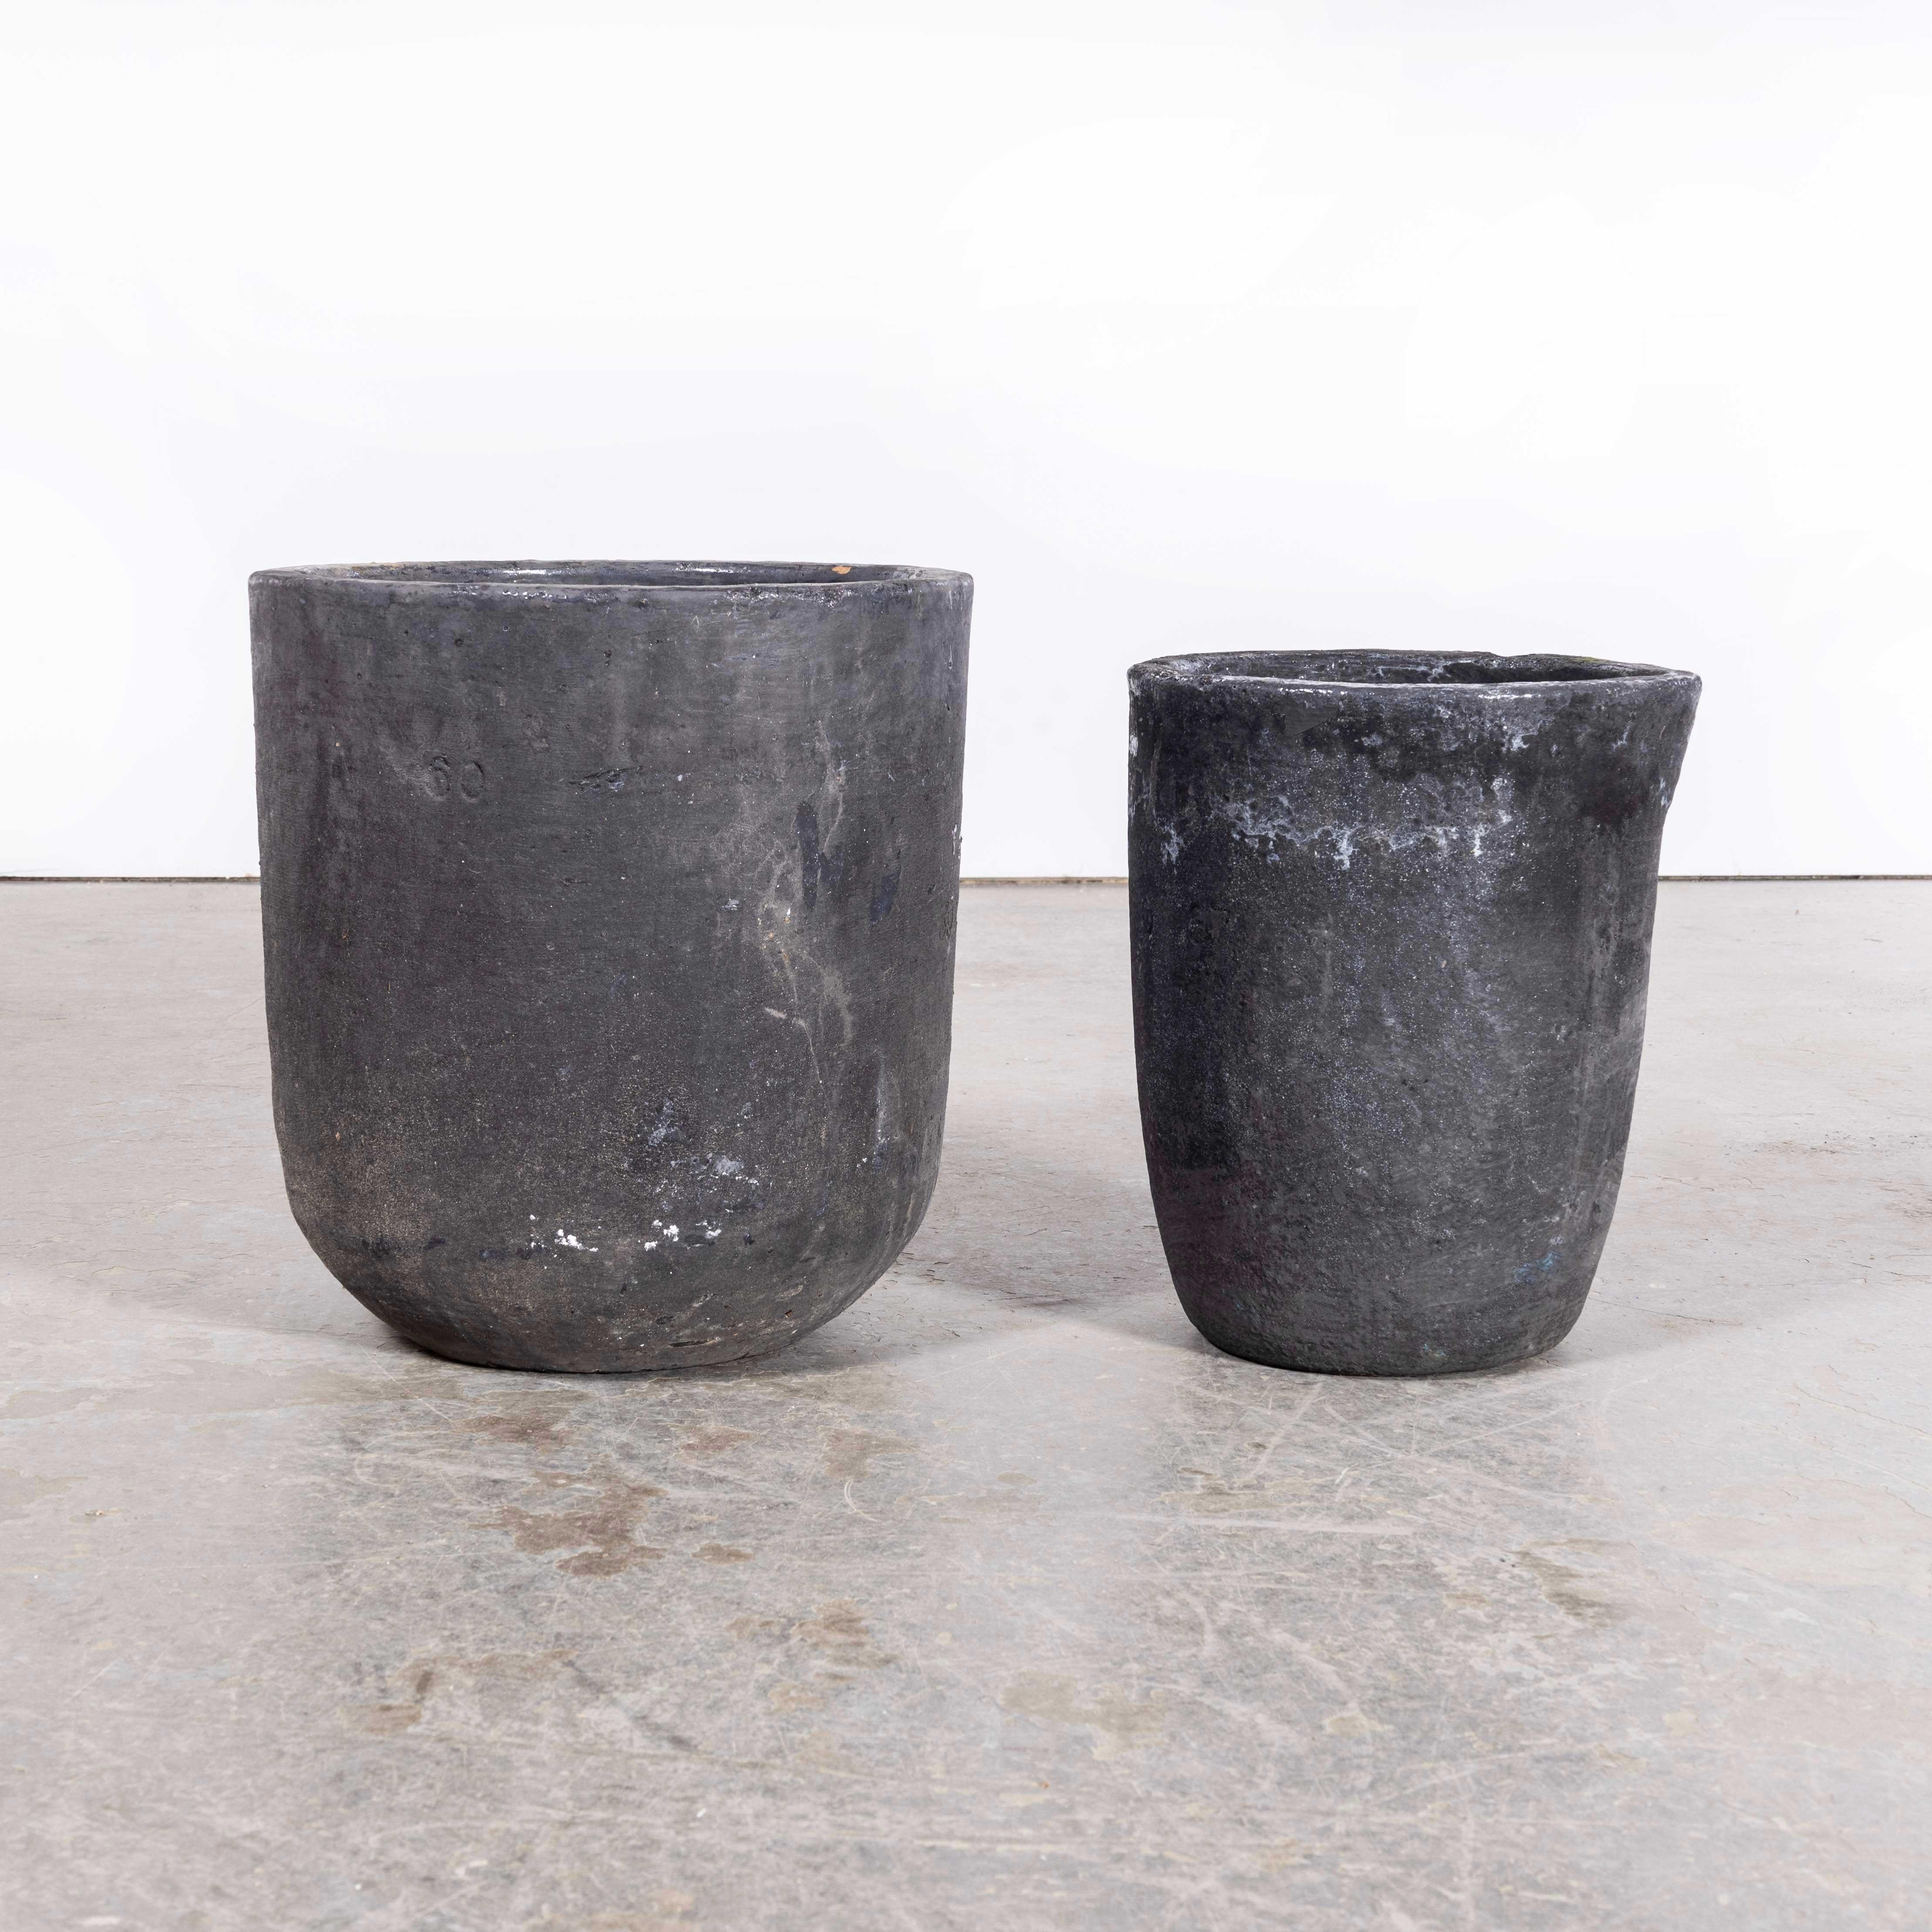 1970’s New Old Stock Foundry Crucible Pots – Pair
1970’s New Old Stock Foundry Crucible Pots – Pair. Sourced in Belgium these crucible pots are new old stock from the 1970’s, never used. Crucible pots are high heat resistant pots used to hold and